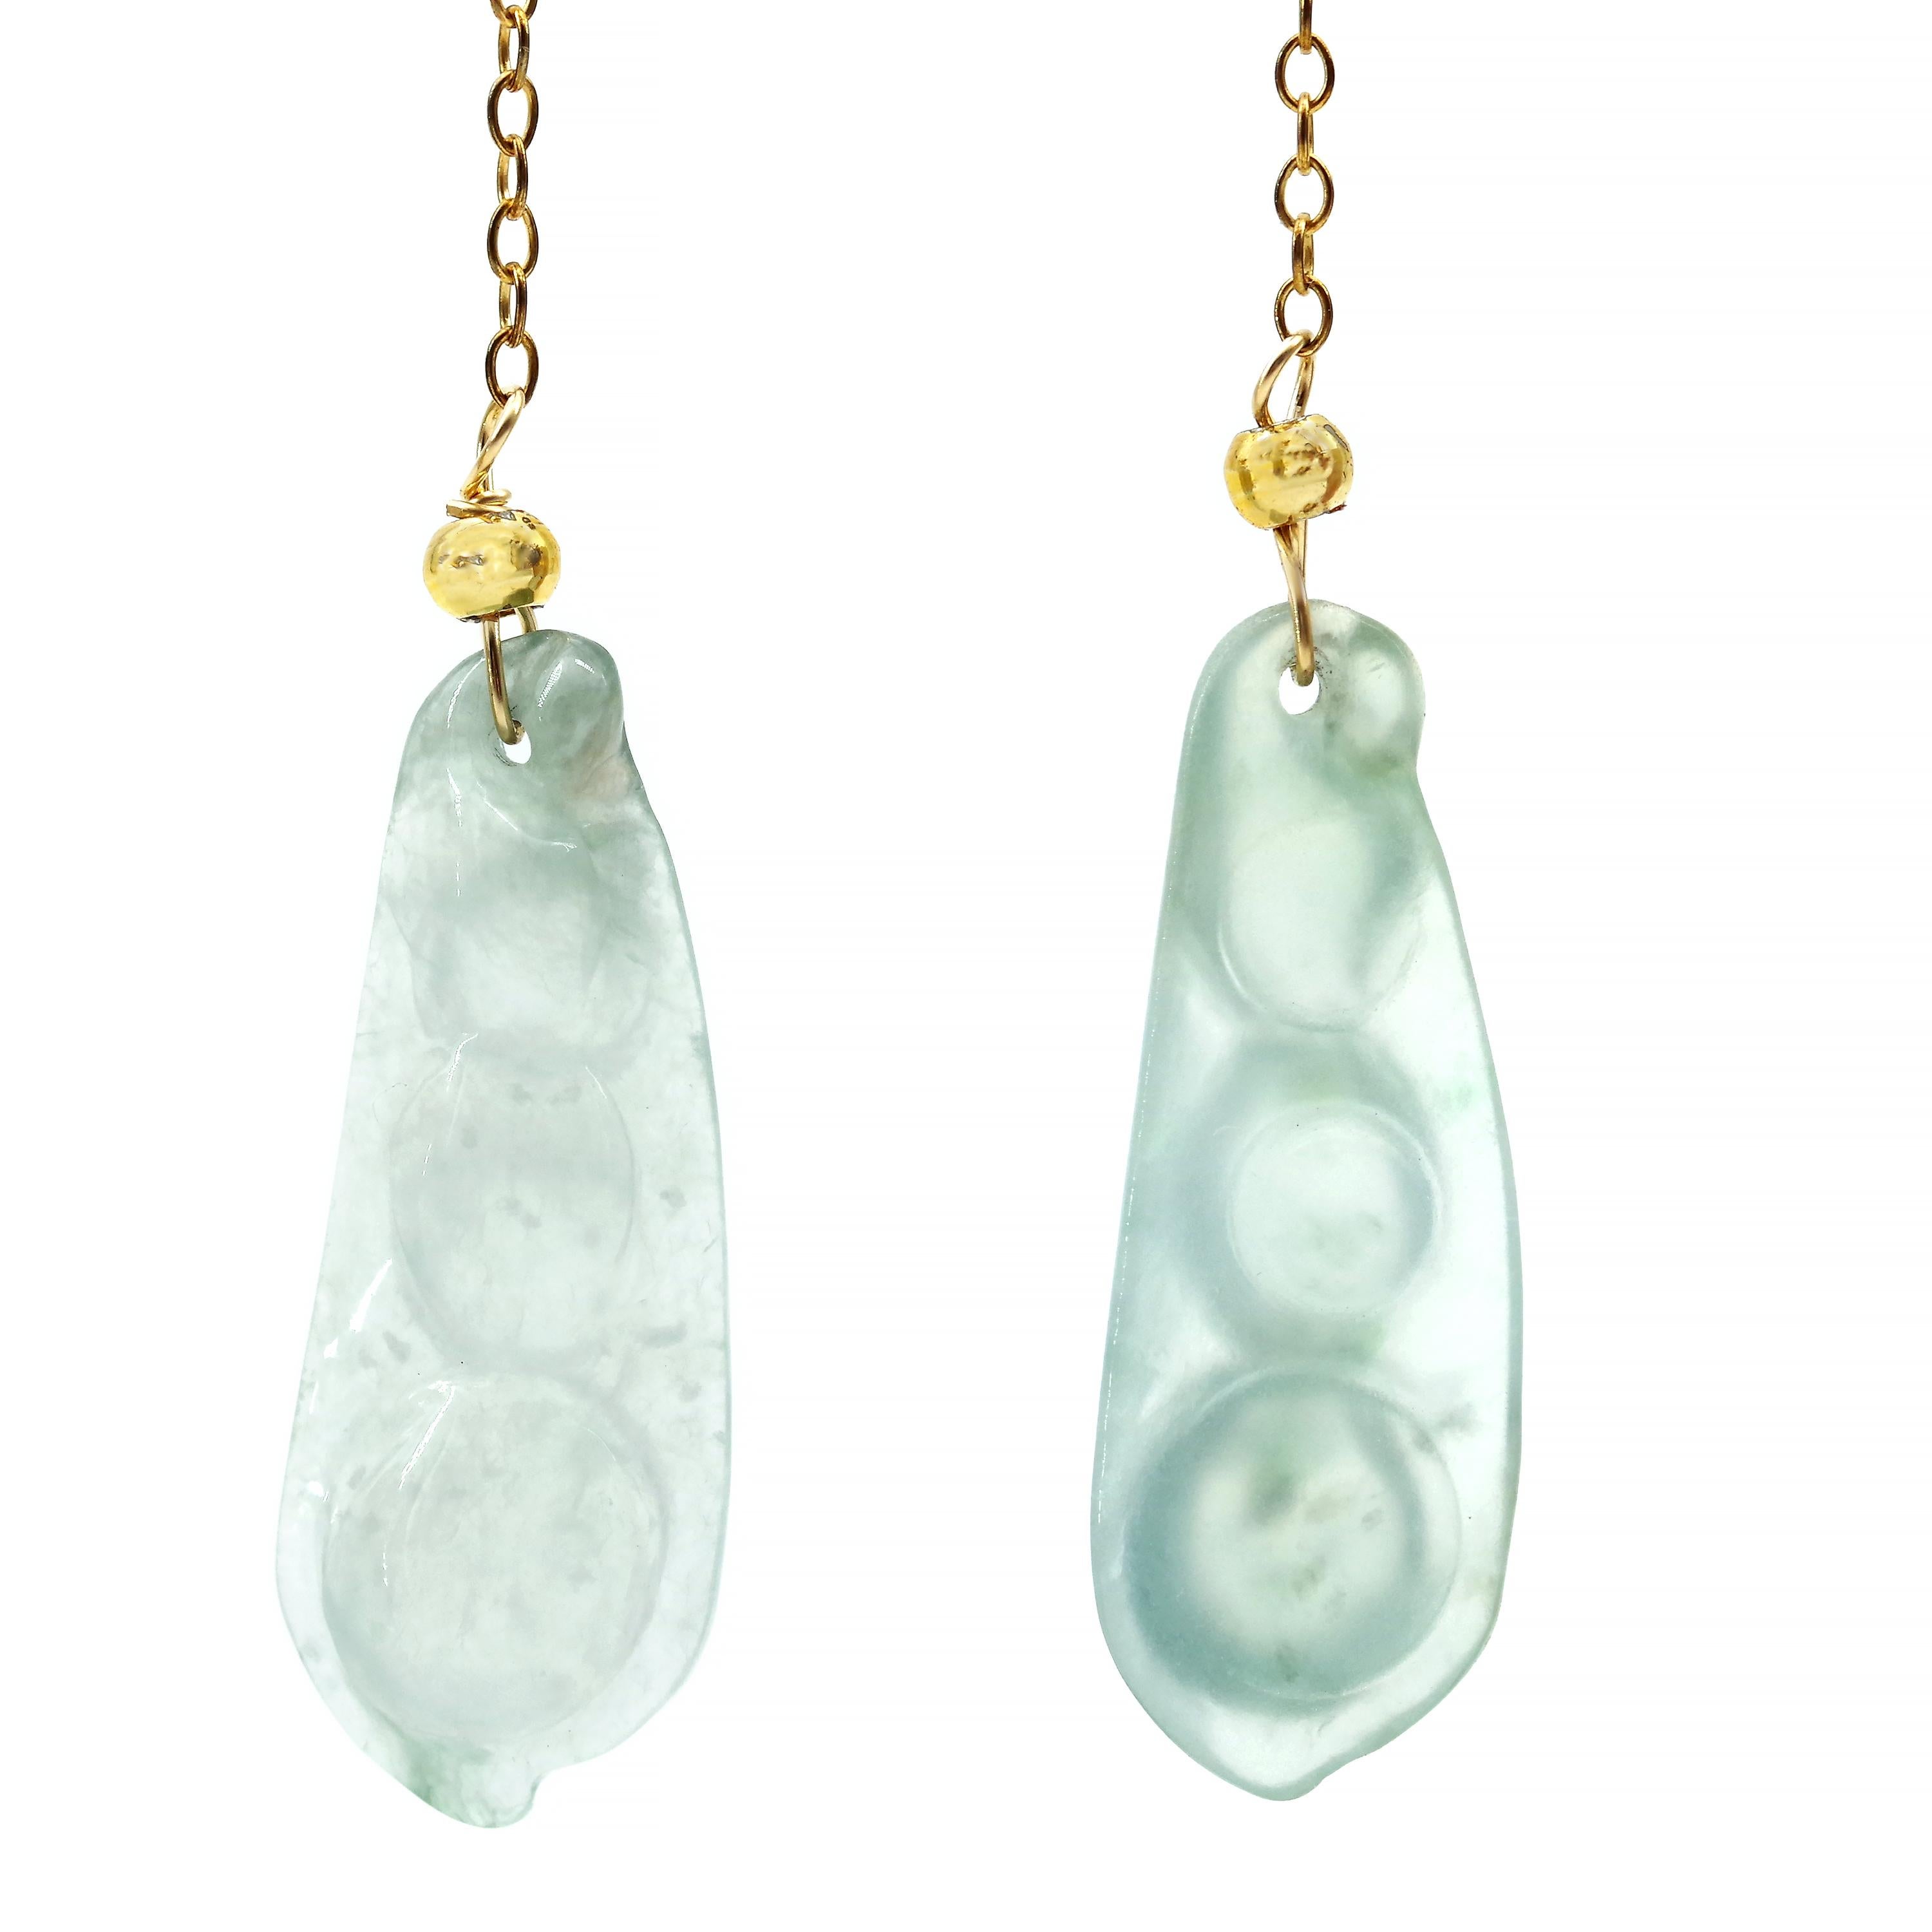 Ethereal: adjective
1. extremely delicate and light in a way that seems too perfect for this world

These are *not* your grandmother's jade earrings. These are rare, natural.  and untreated 